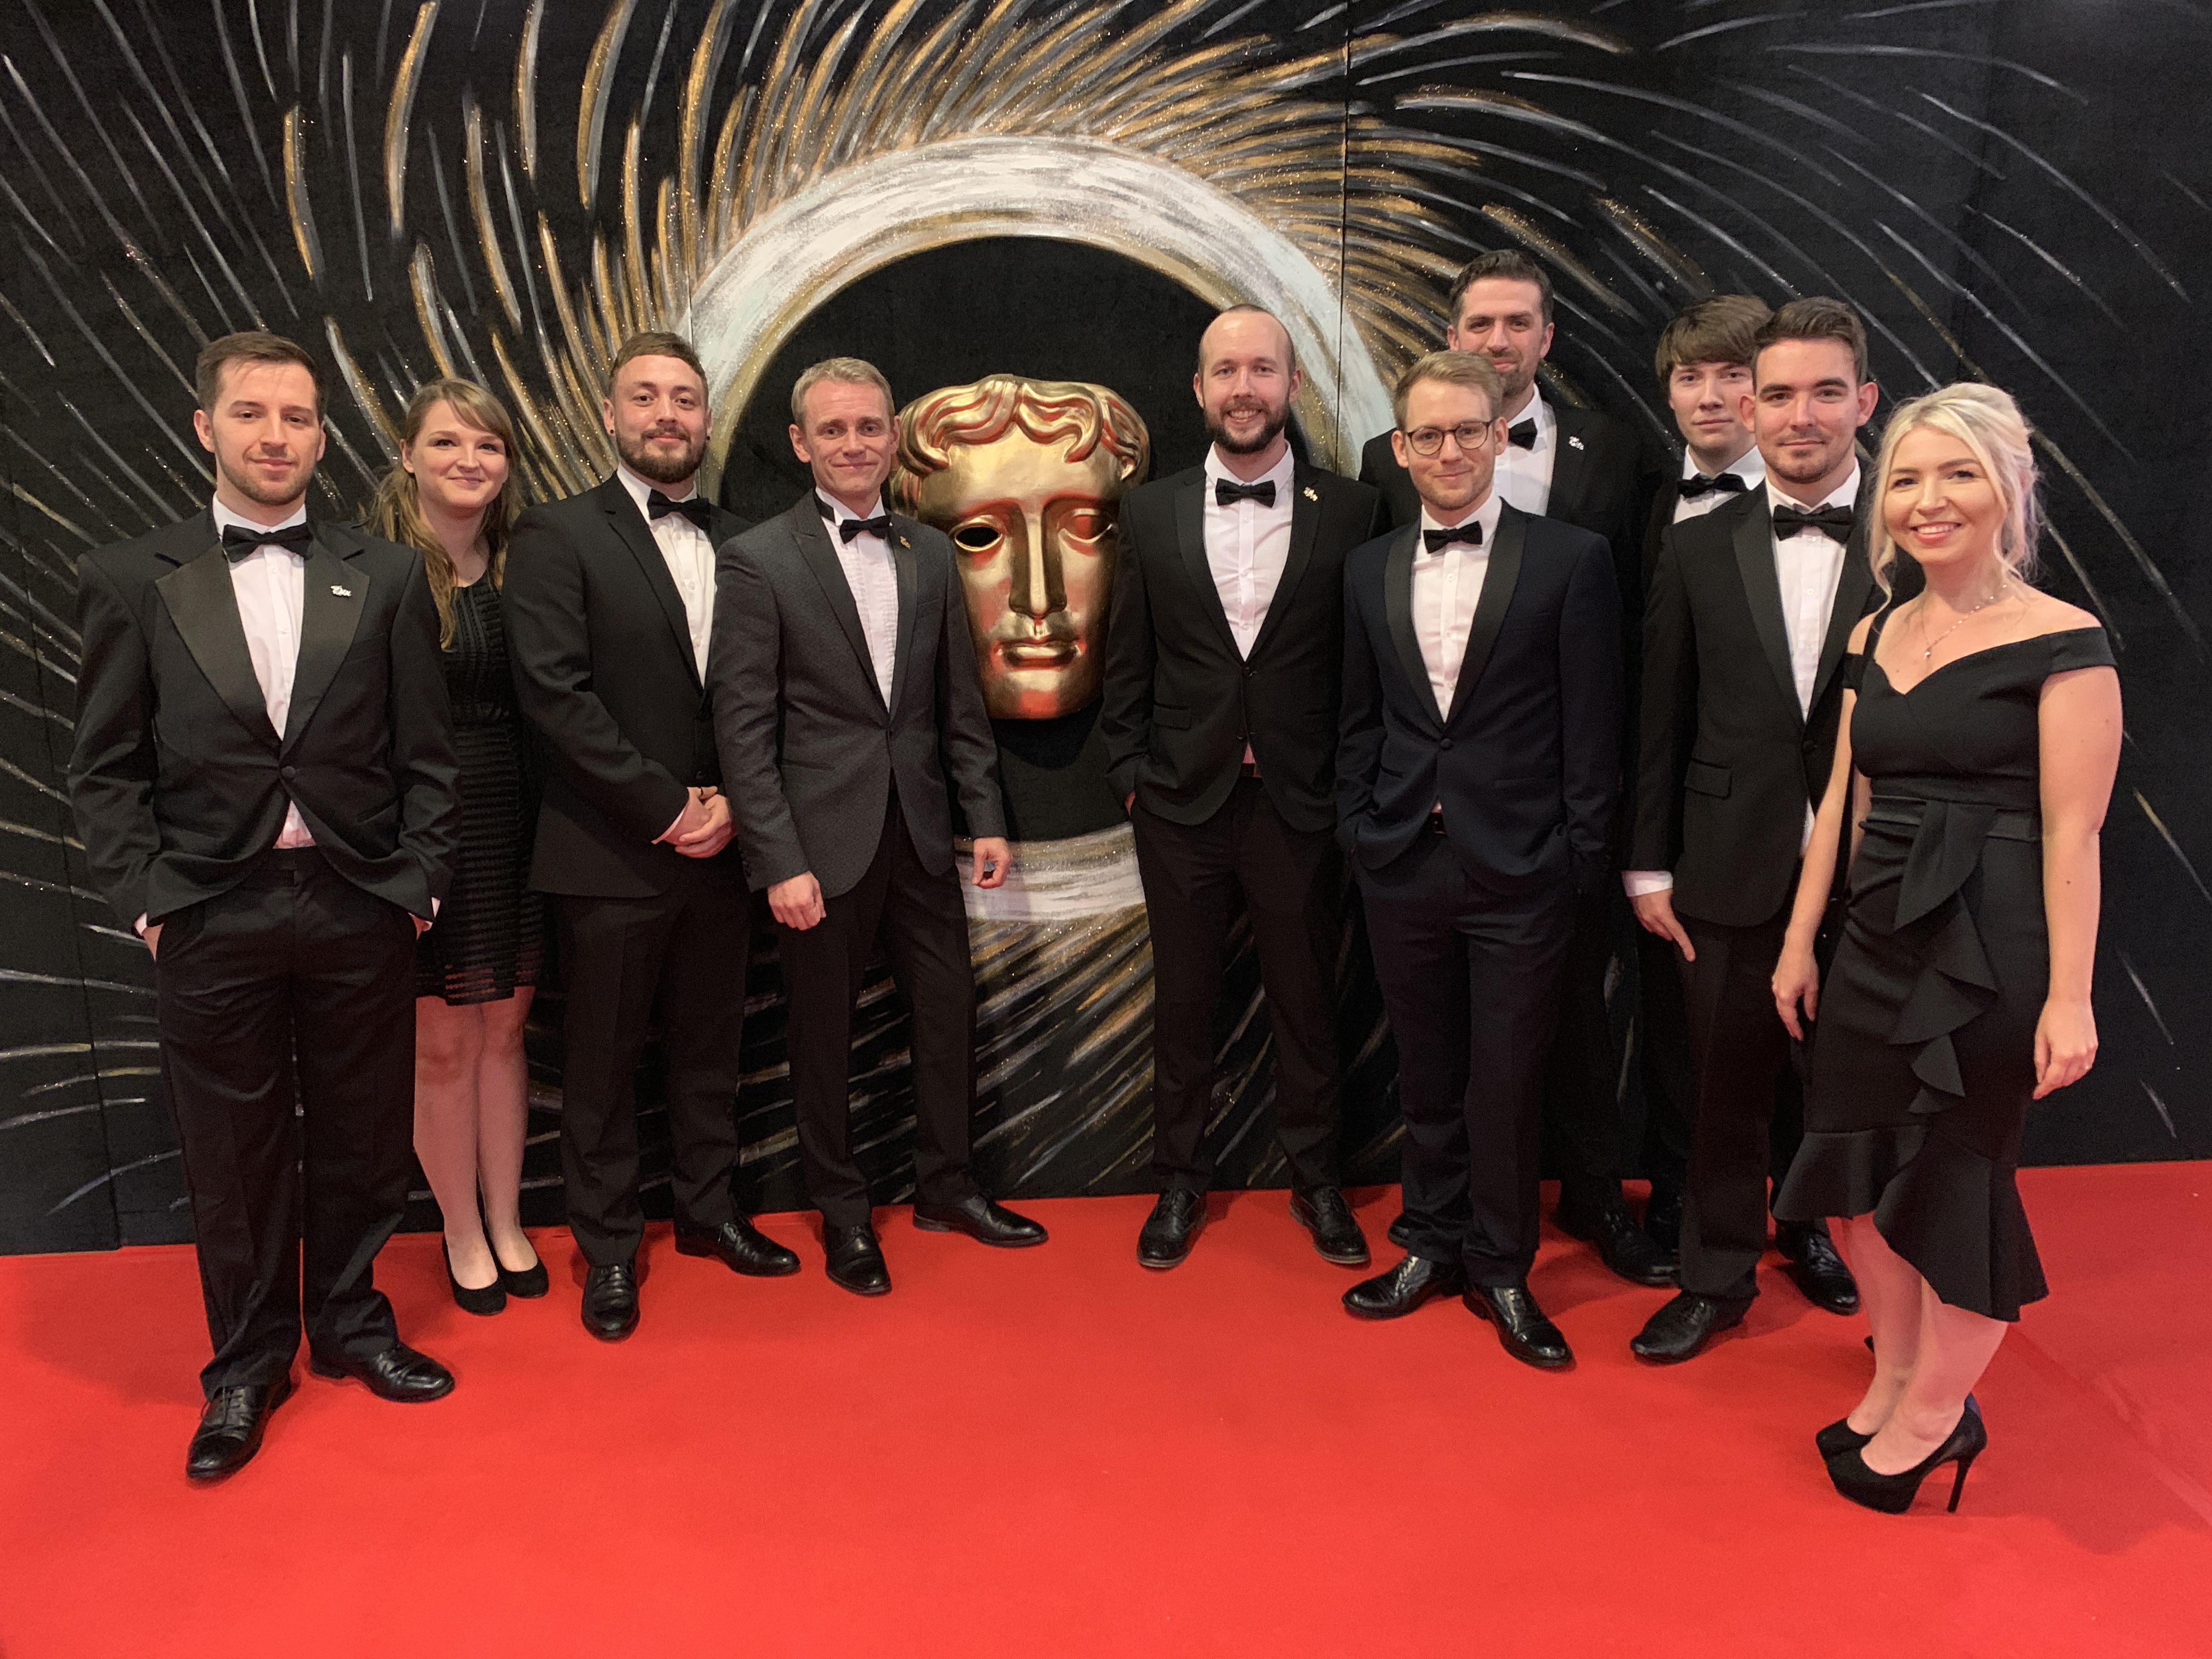 Wales Interactive team on the red carpet at the BAFTAs